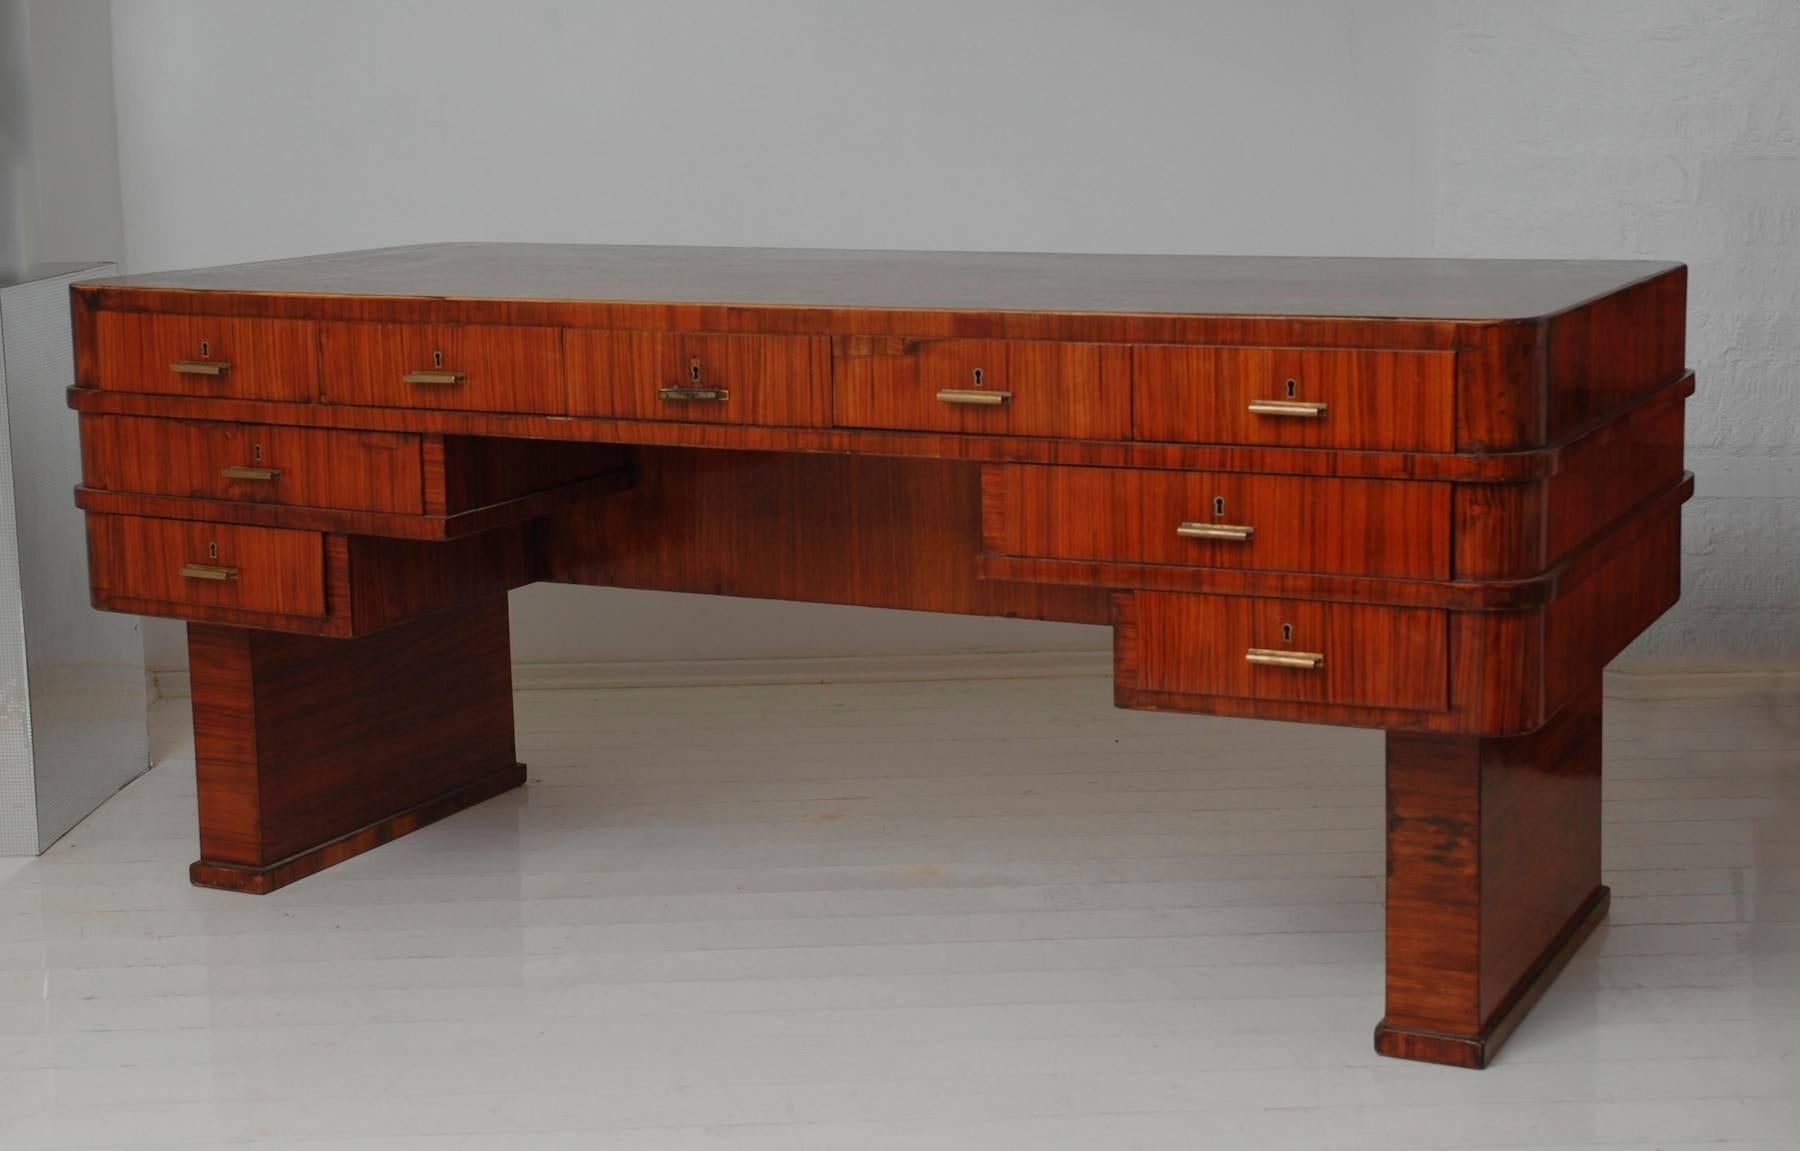 This rare large double sided desk was designed by Lajos (Ludwig) Kozma, who had an unprecedented influence on the European design through his drawings, buildings and furniture.

This desk has walnut and rosewood veneer and brass knobs. It has 18